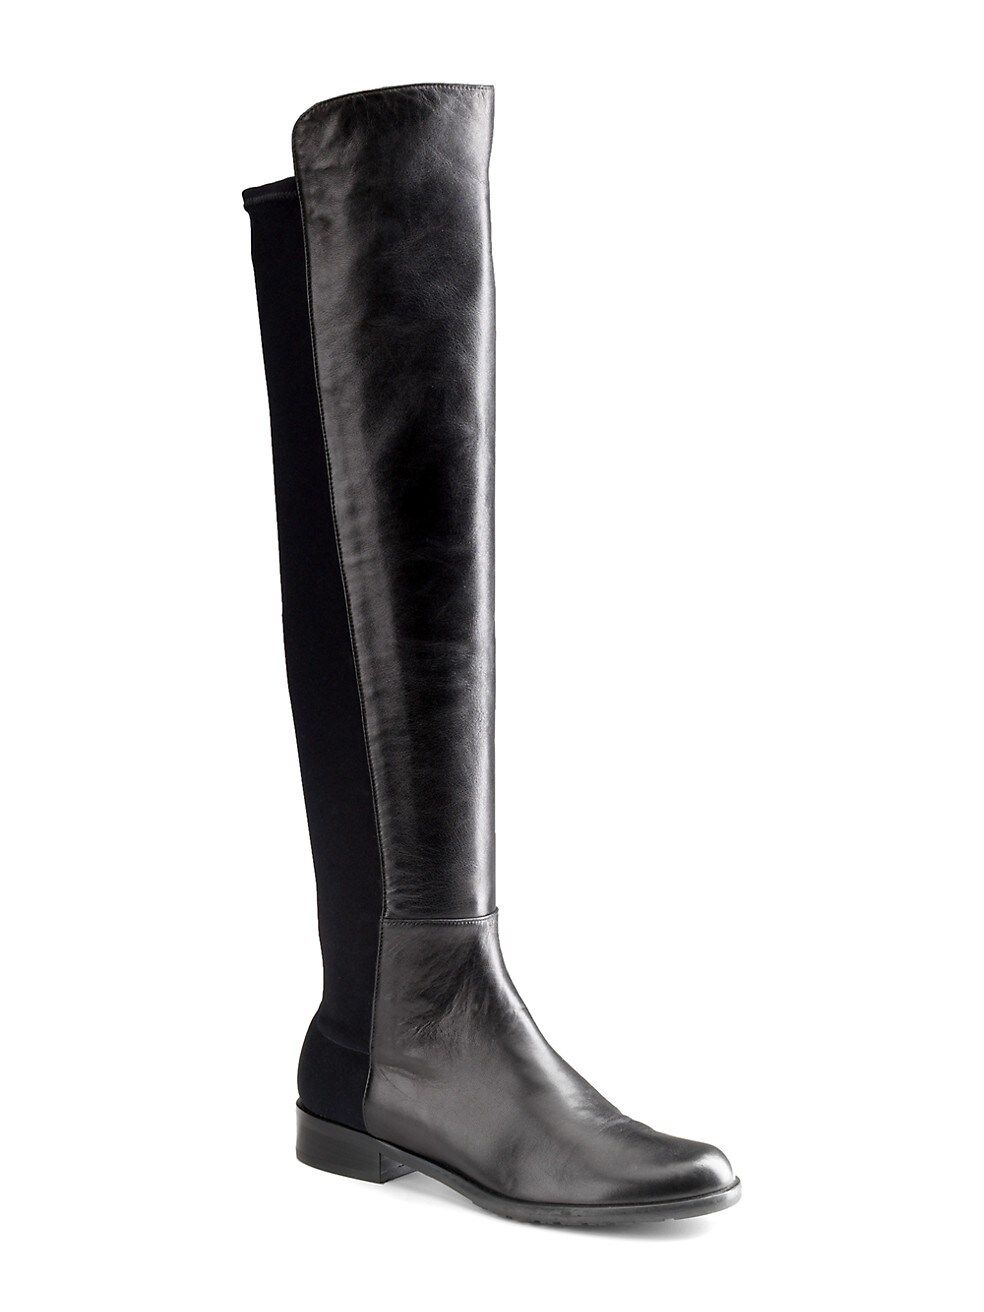 Stuart Weitzman 5050 Over-The-Knee Stretch-Leather Boots | Saks Fifth Avenue